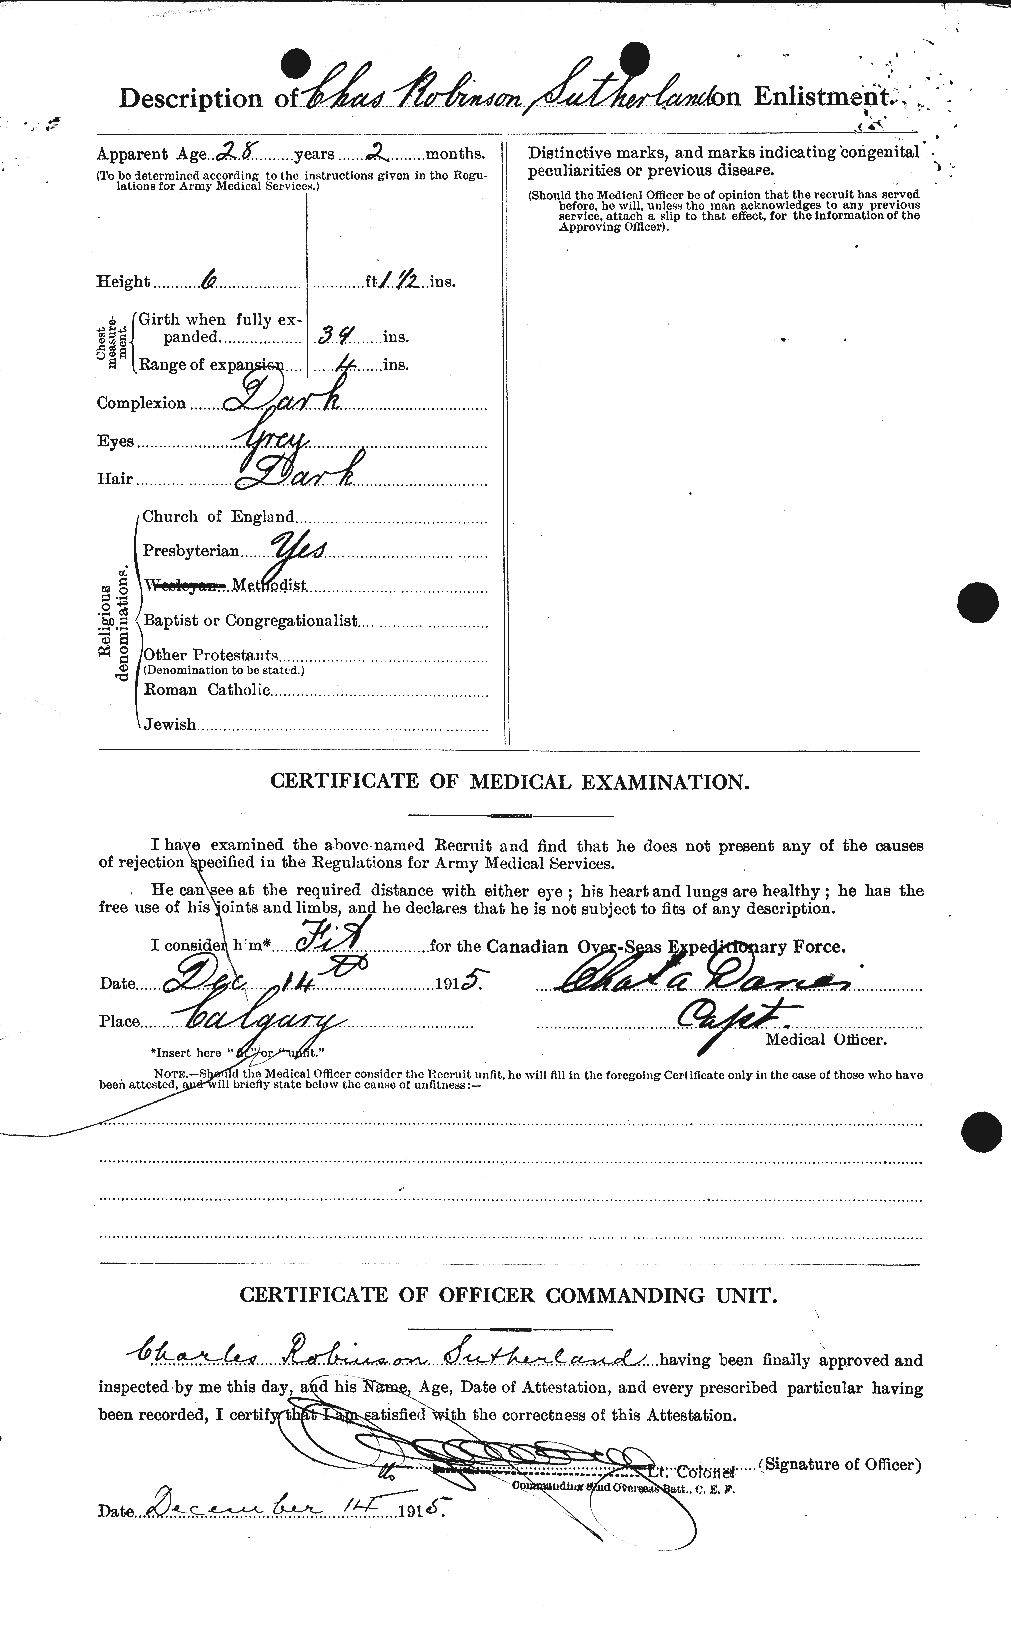 Personnel Records of the First World War - CEF 125293b